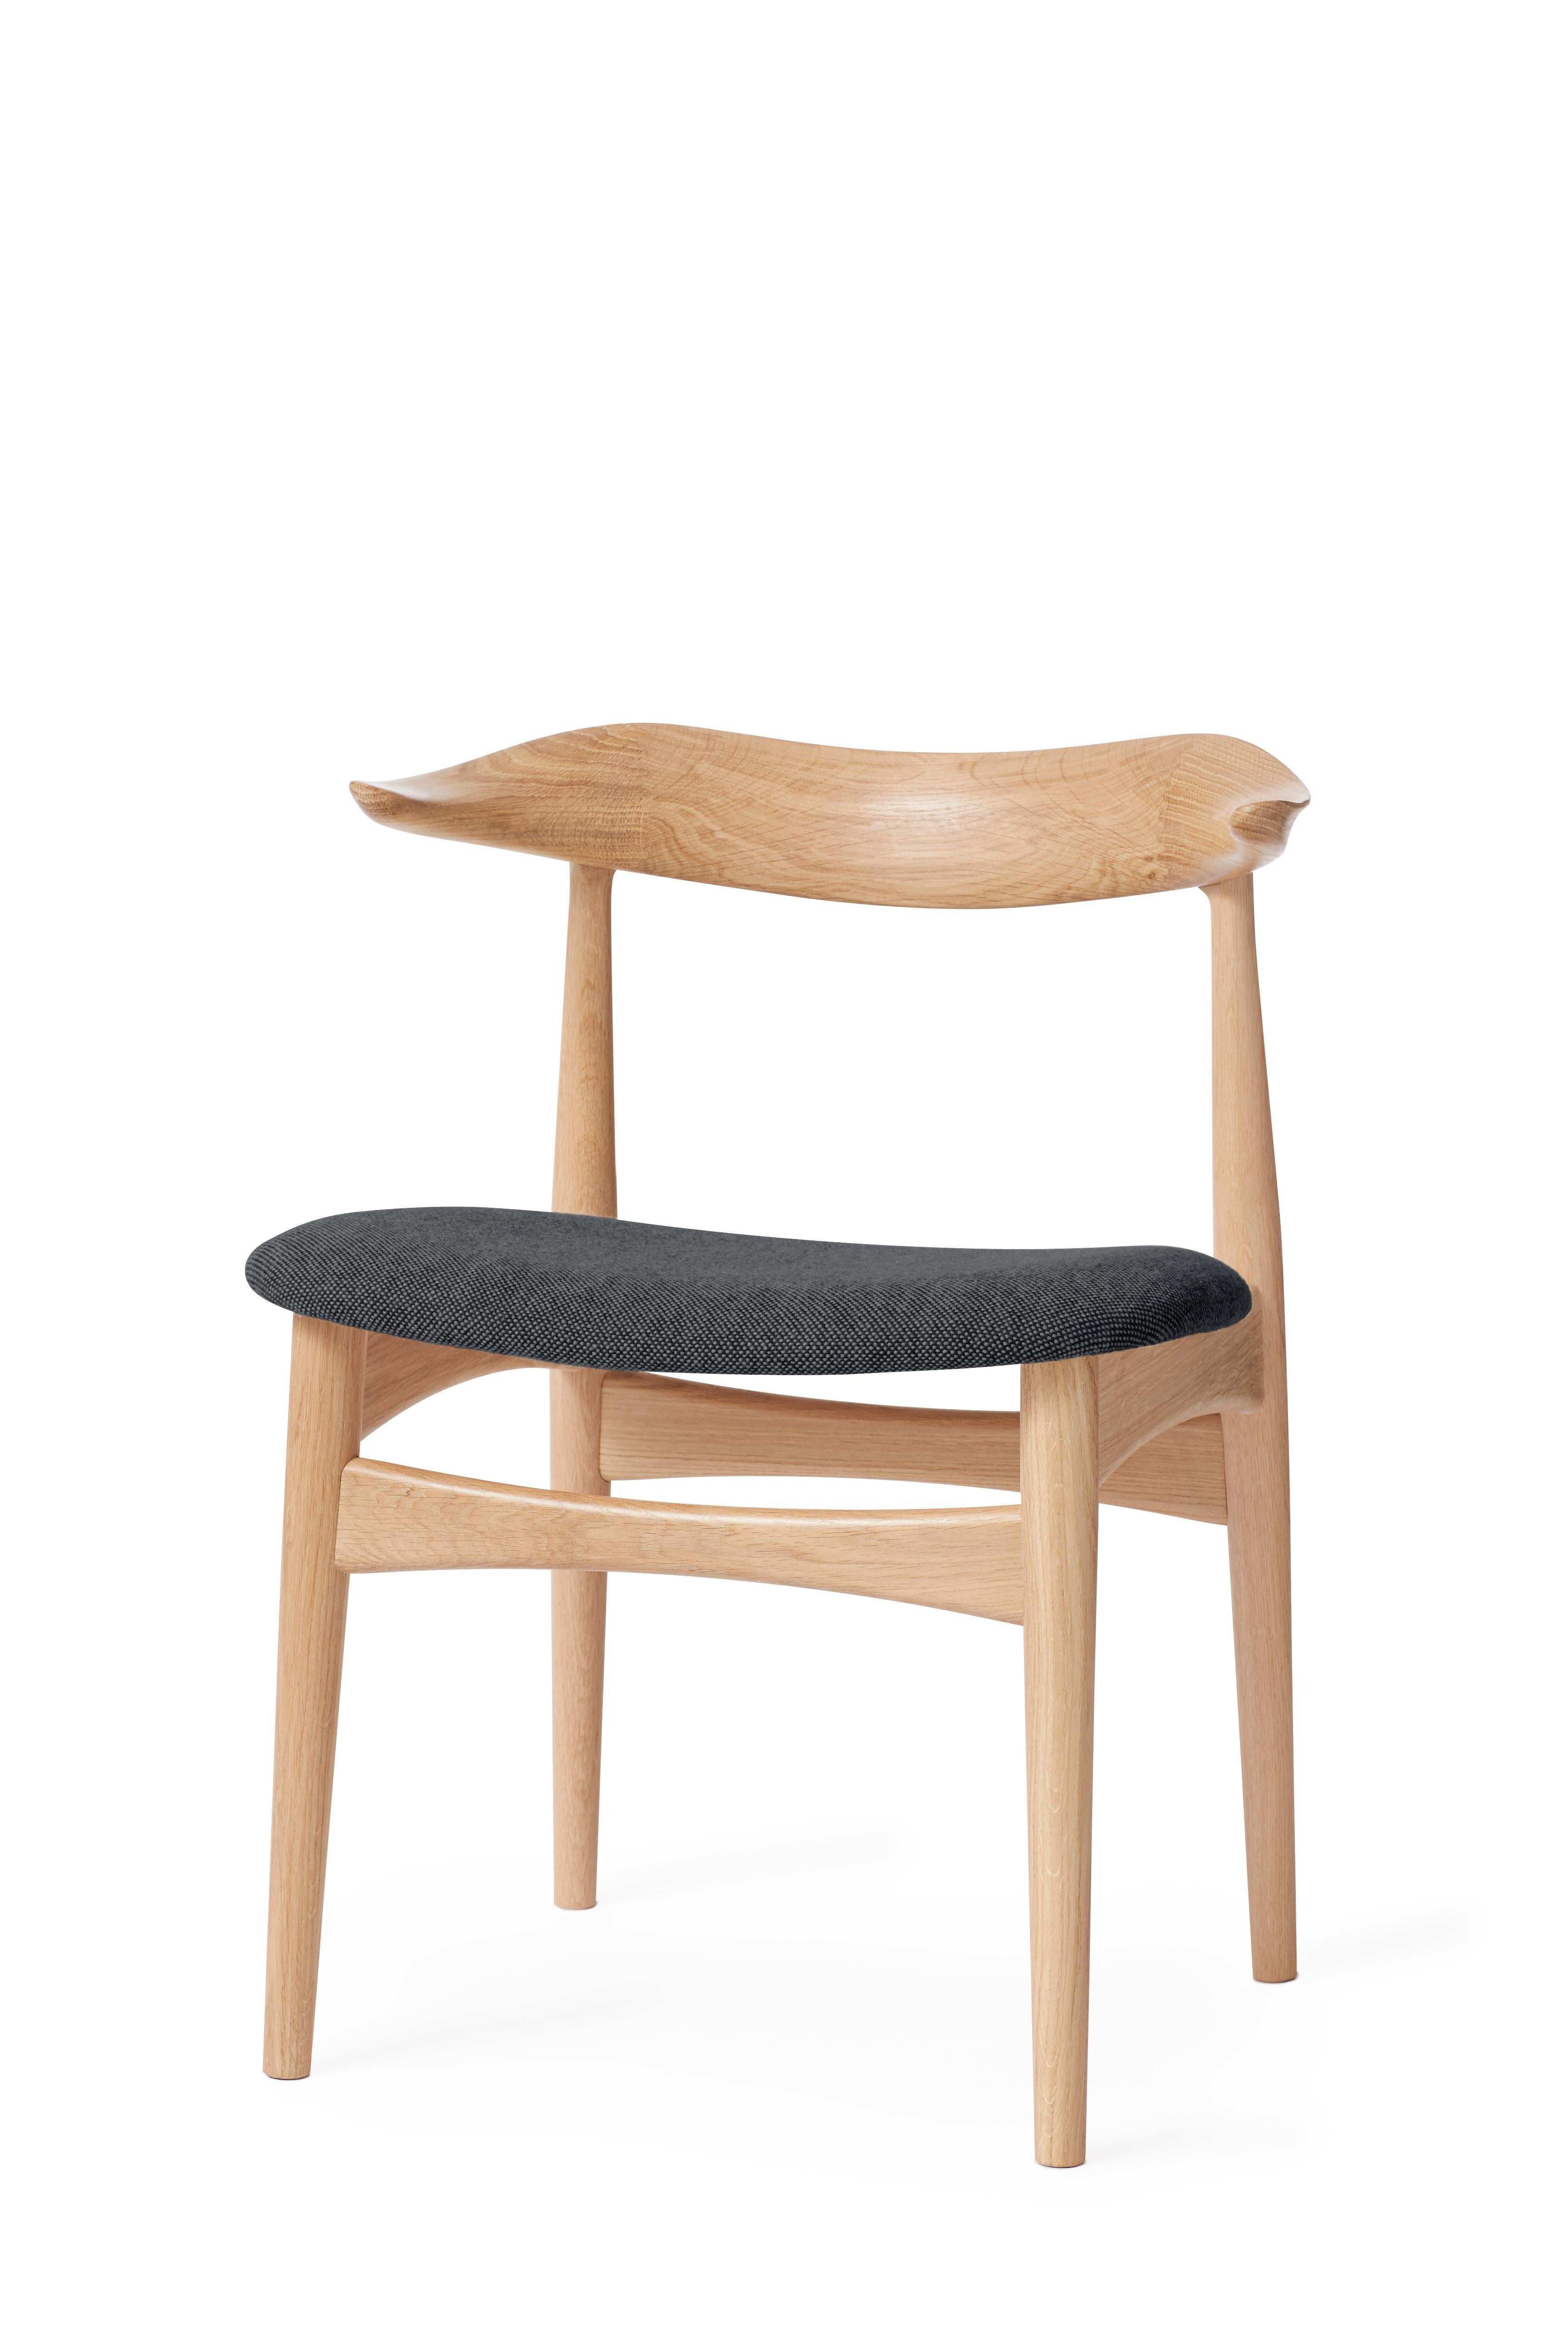 For Sale: Black (Hallingdal 180) Cow Horn Oak Chair, by Knud Færch from Warm Nordic 2